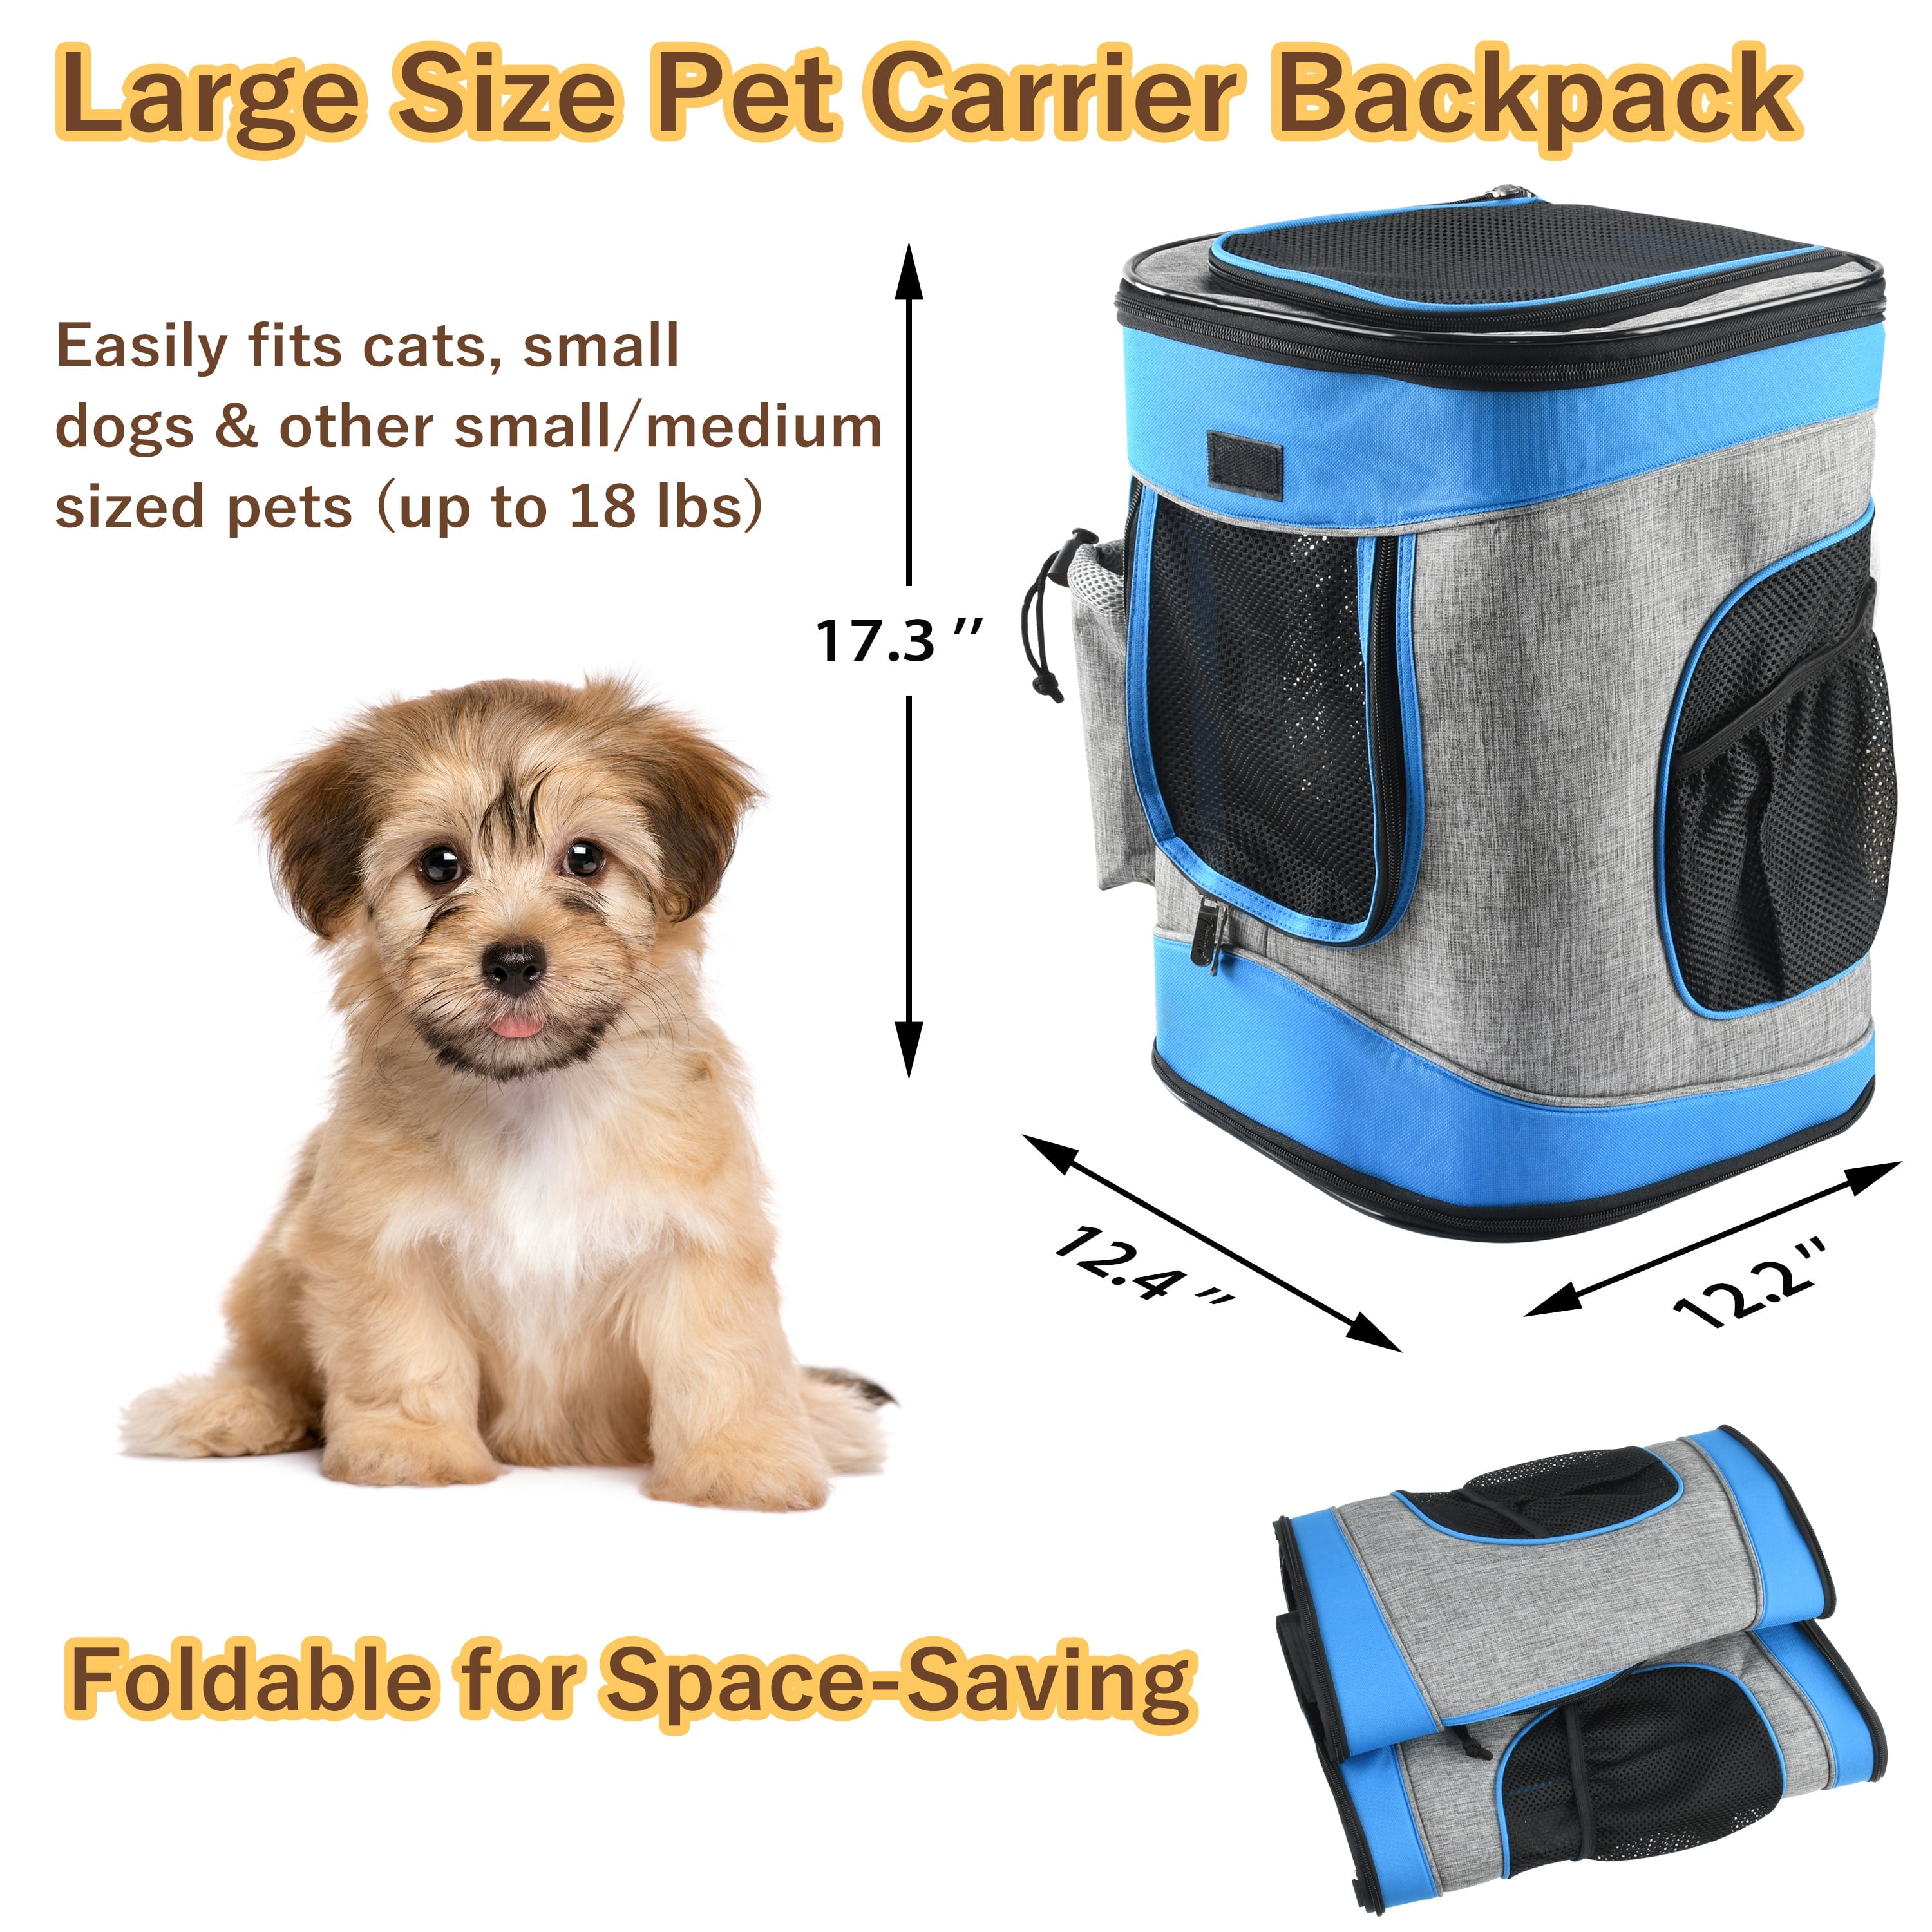 Tirrinia Pet Carrier Backpack for Dogs and Cats up to 15 LBS Comfort Dog Cat Carrier Travel Bag Breathable for Hiking， Walking， Cycling and Outdoor Use 16